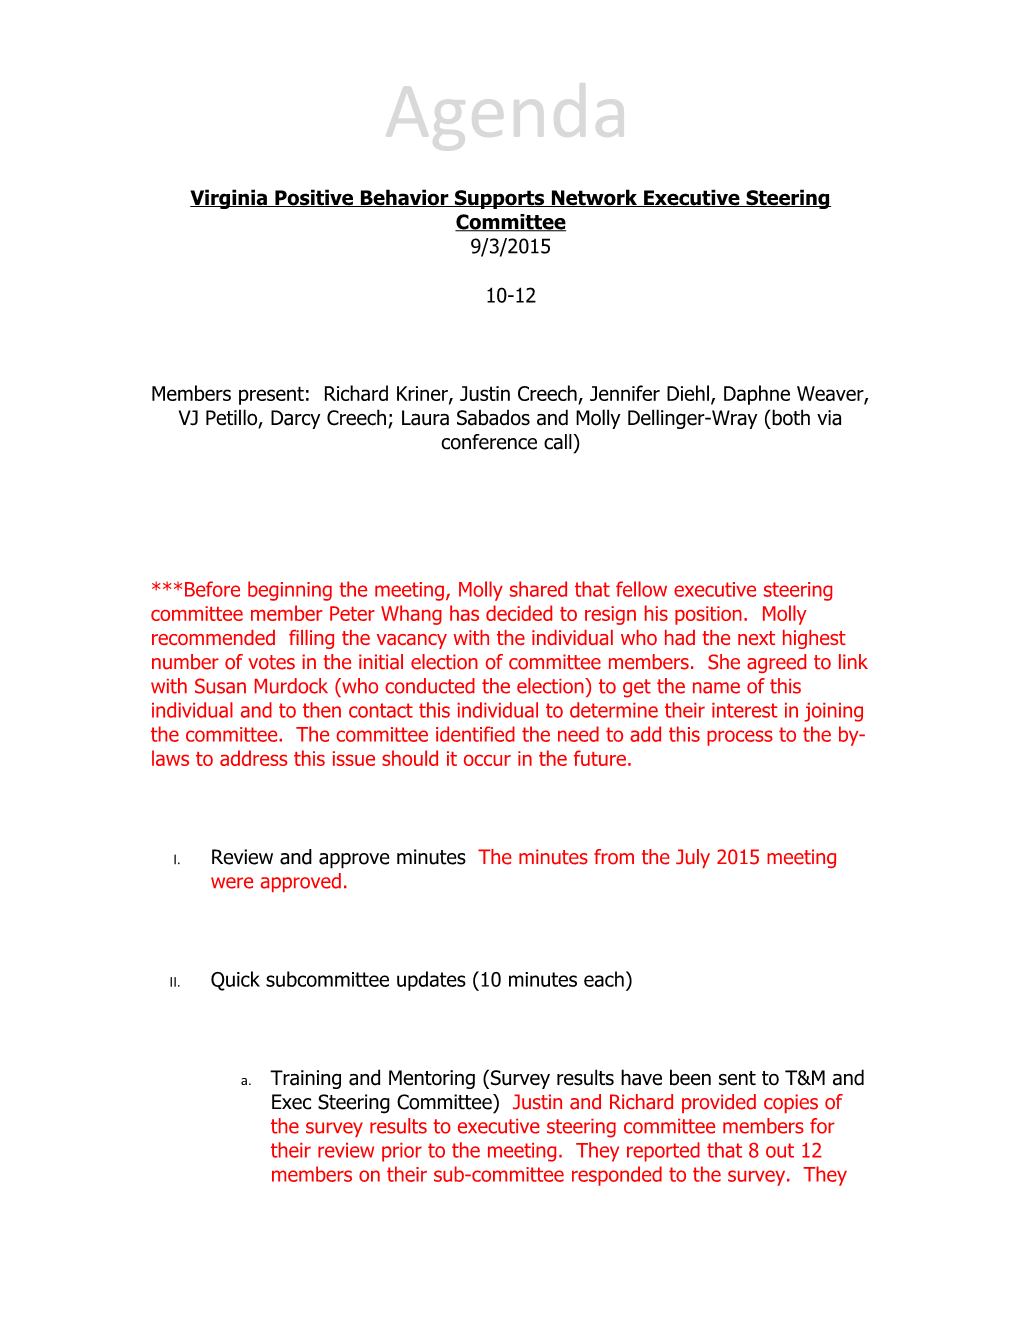 Virginia Positive Behavior Supports Network Executive Steering Committee